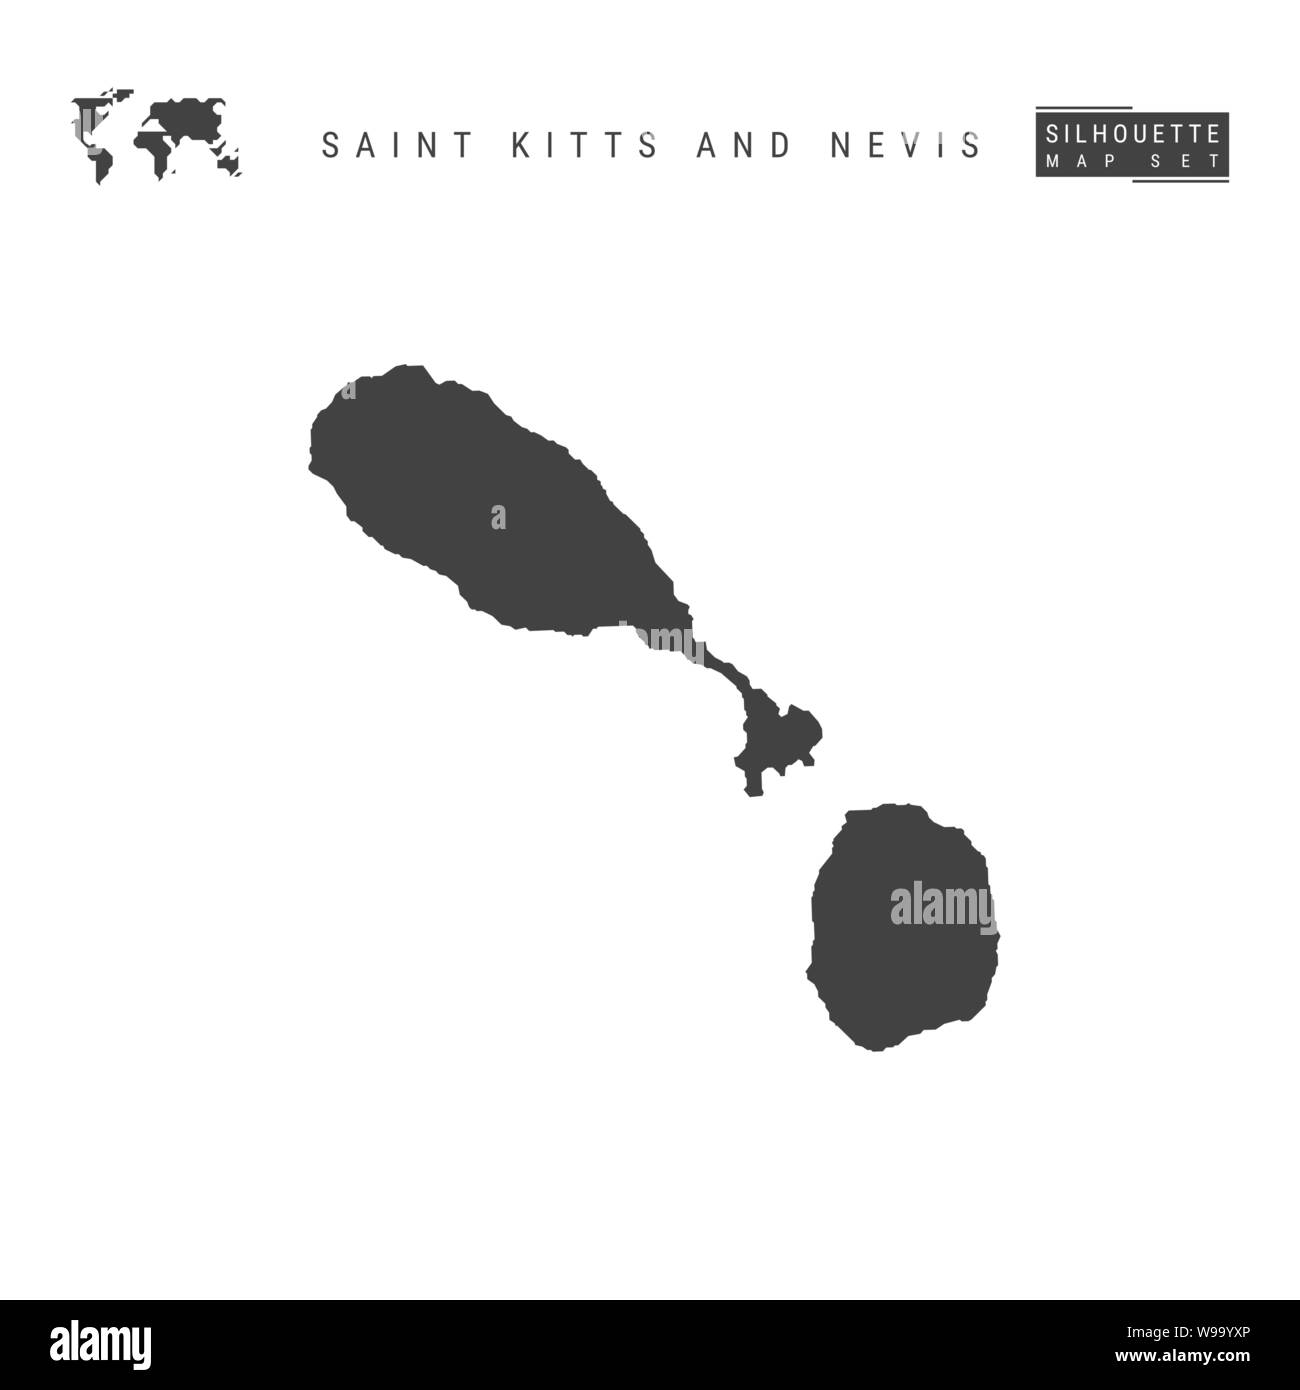 Saint Kitts and Nevis Blank Vector Map Isolated on White Background. High-Detailed Black Silhouette Map of Saint Kitts and Nevis. Stock Vector